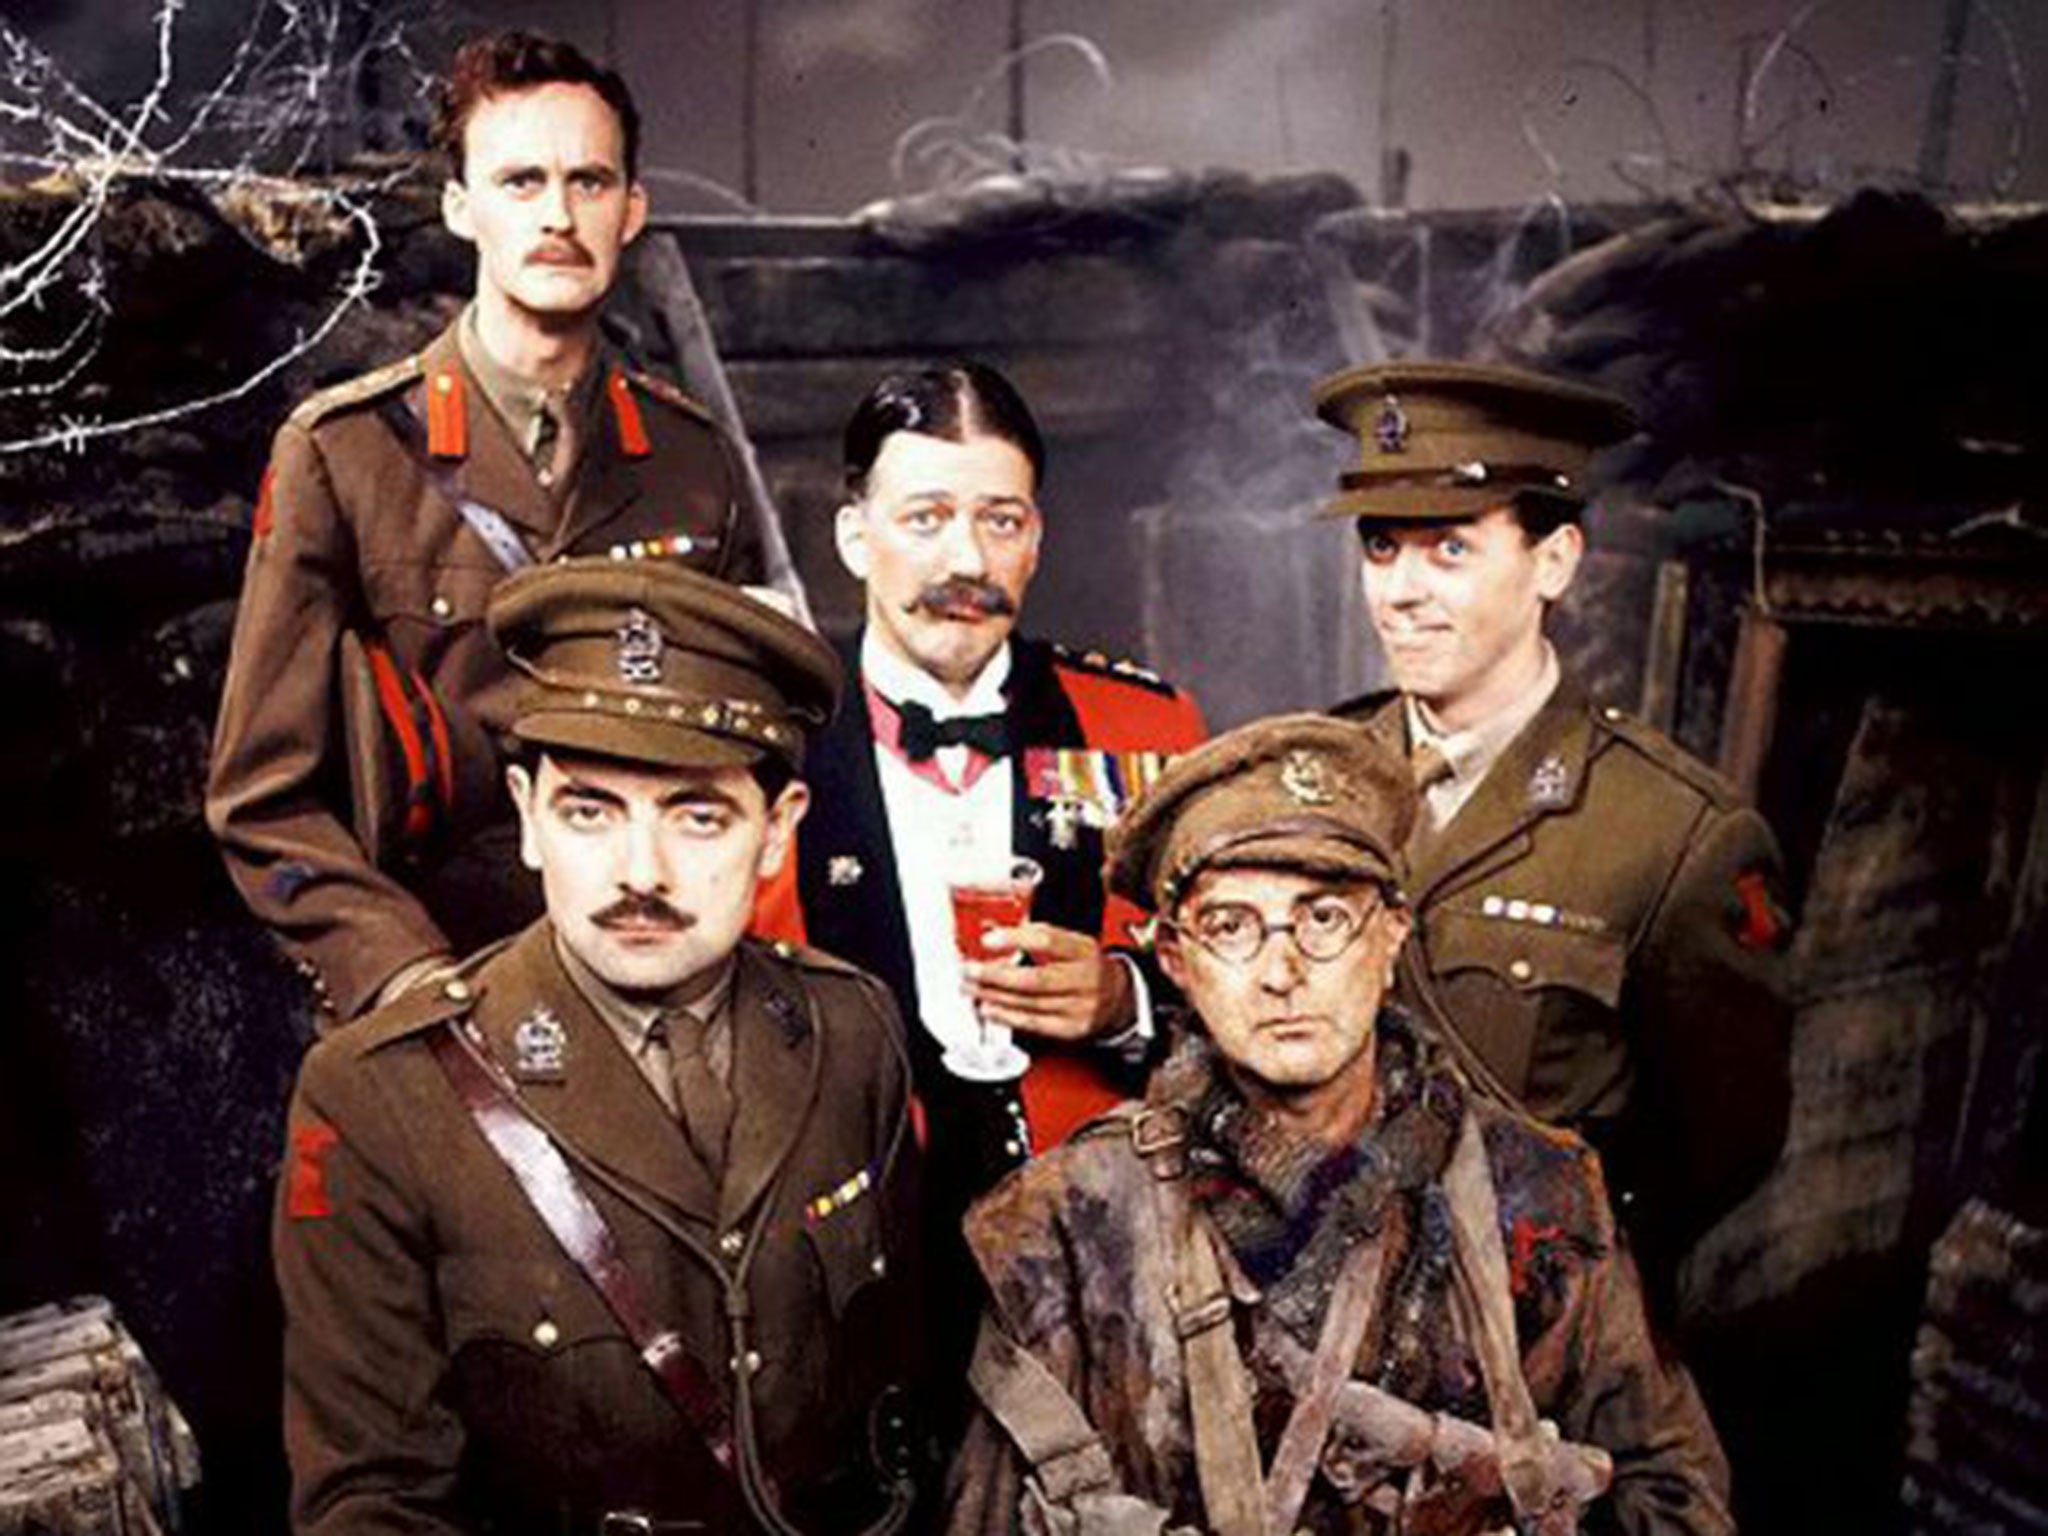 Blackadder and Co, TV characters